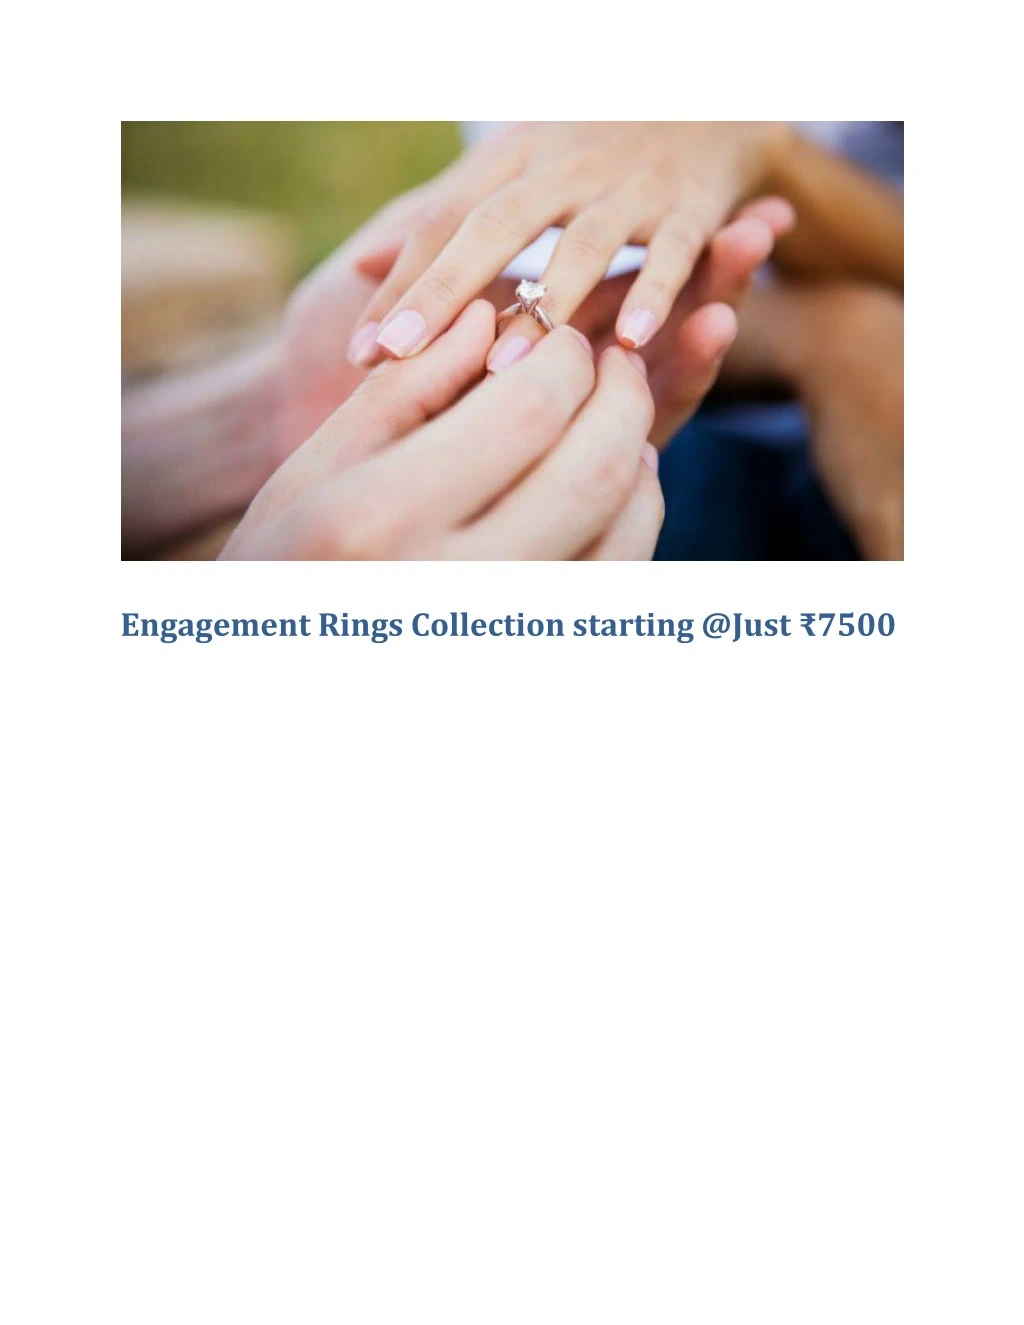 engagement rings collection starting @just 7500